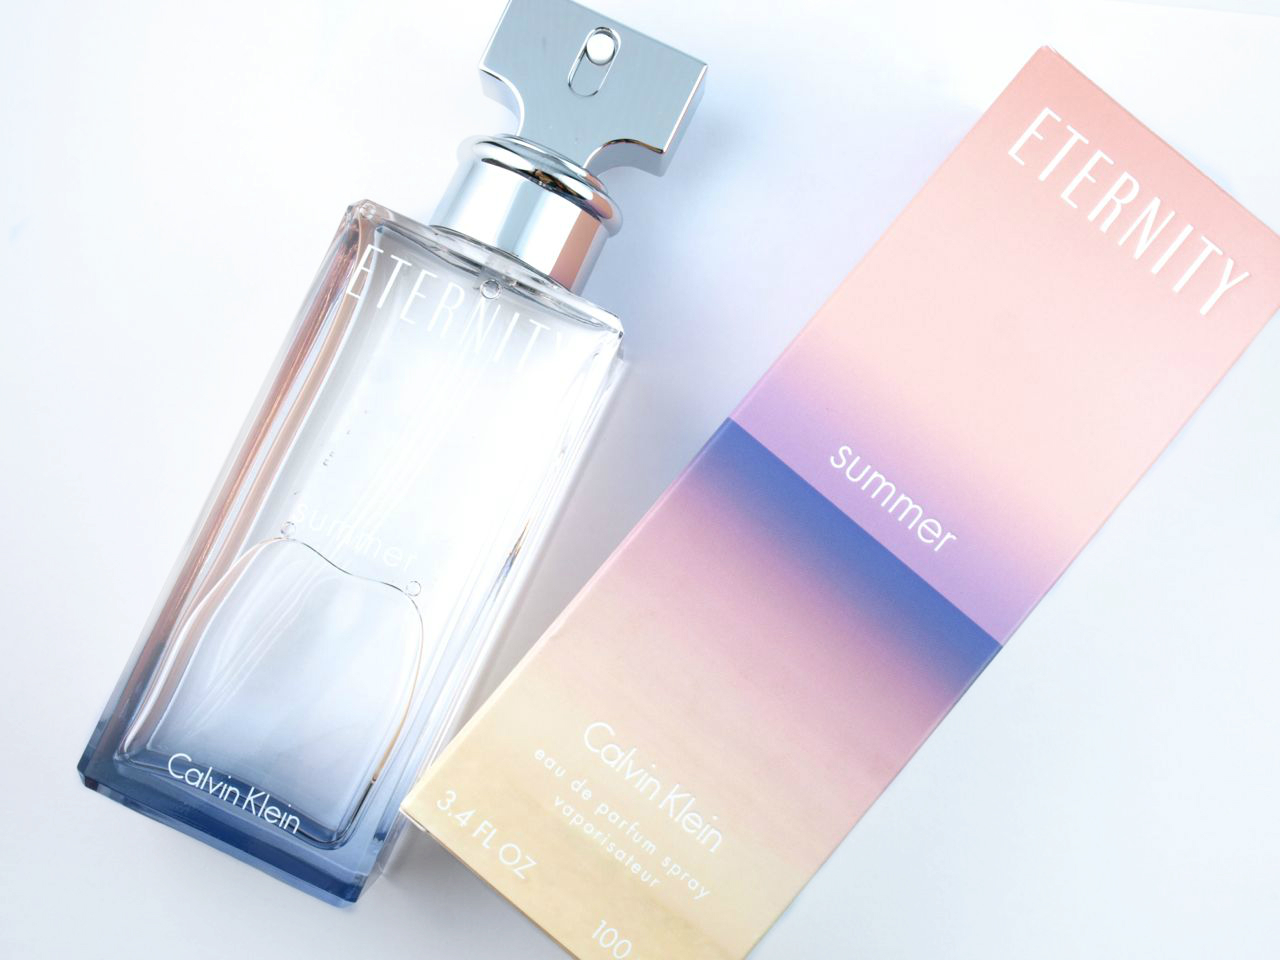 Calvin Klein Eternity Summer 2015 Eau de Parfum Spray: Review | The Happy  Sloths: Beauty, Makeup, and Skincare Blog with Reviews and Swatches